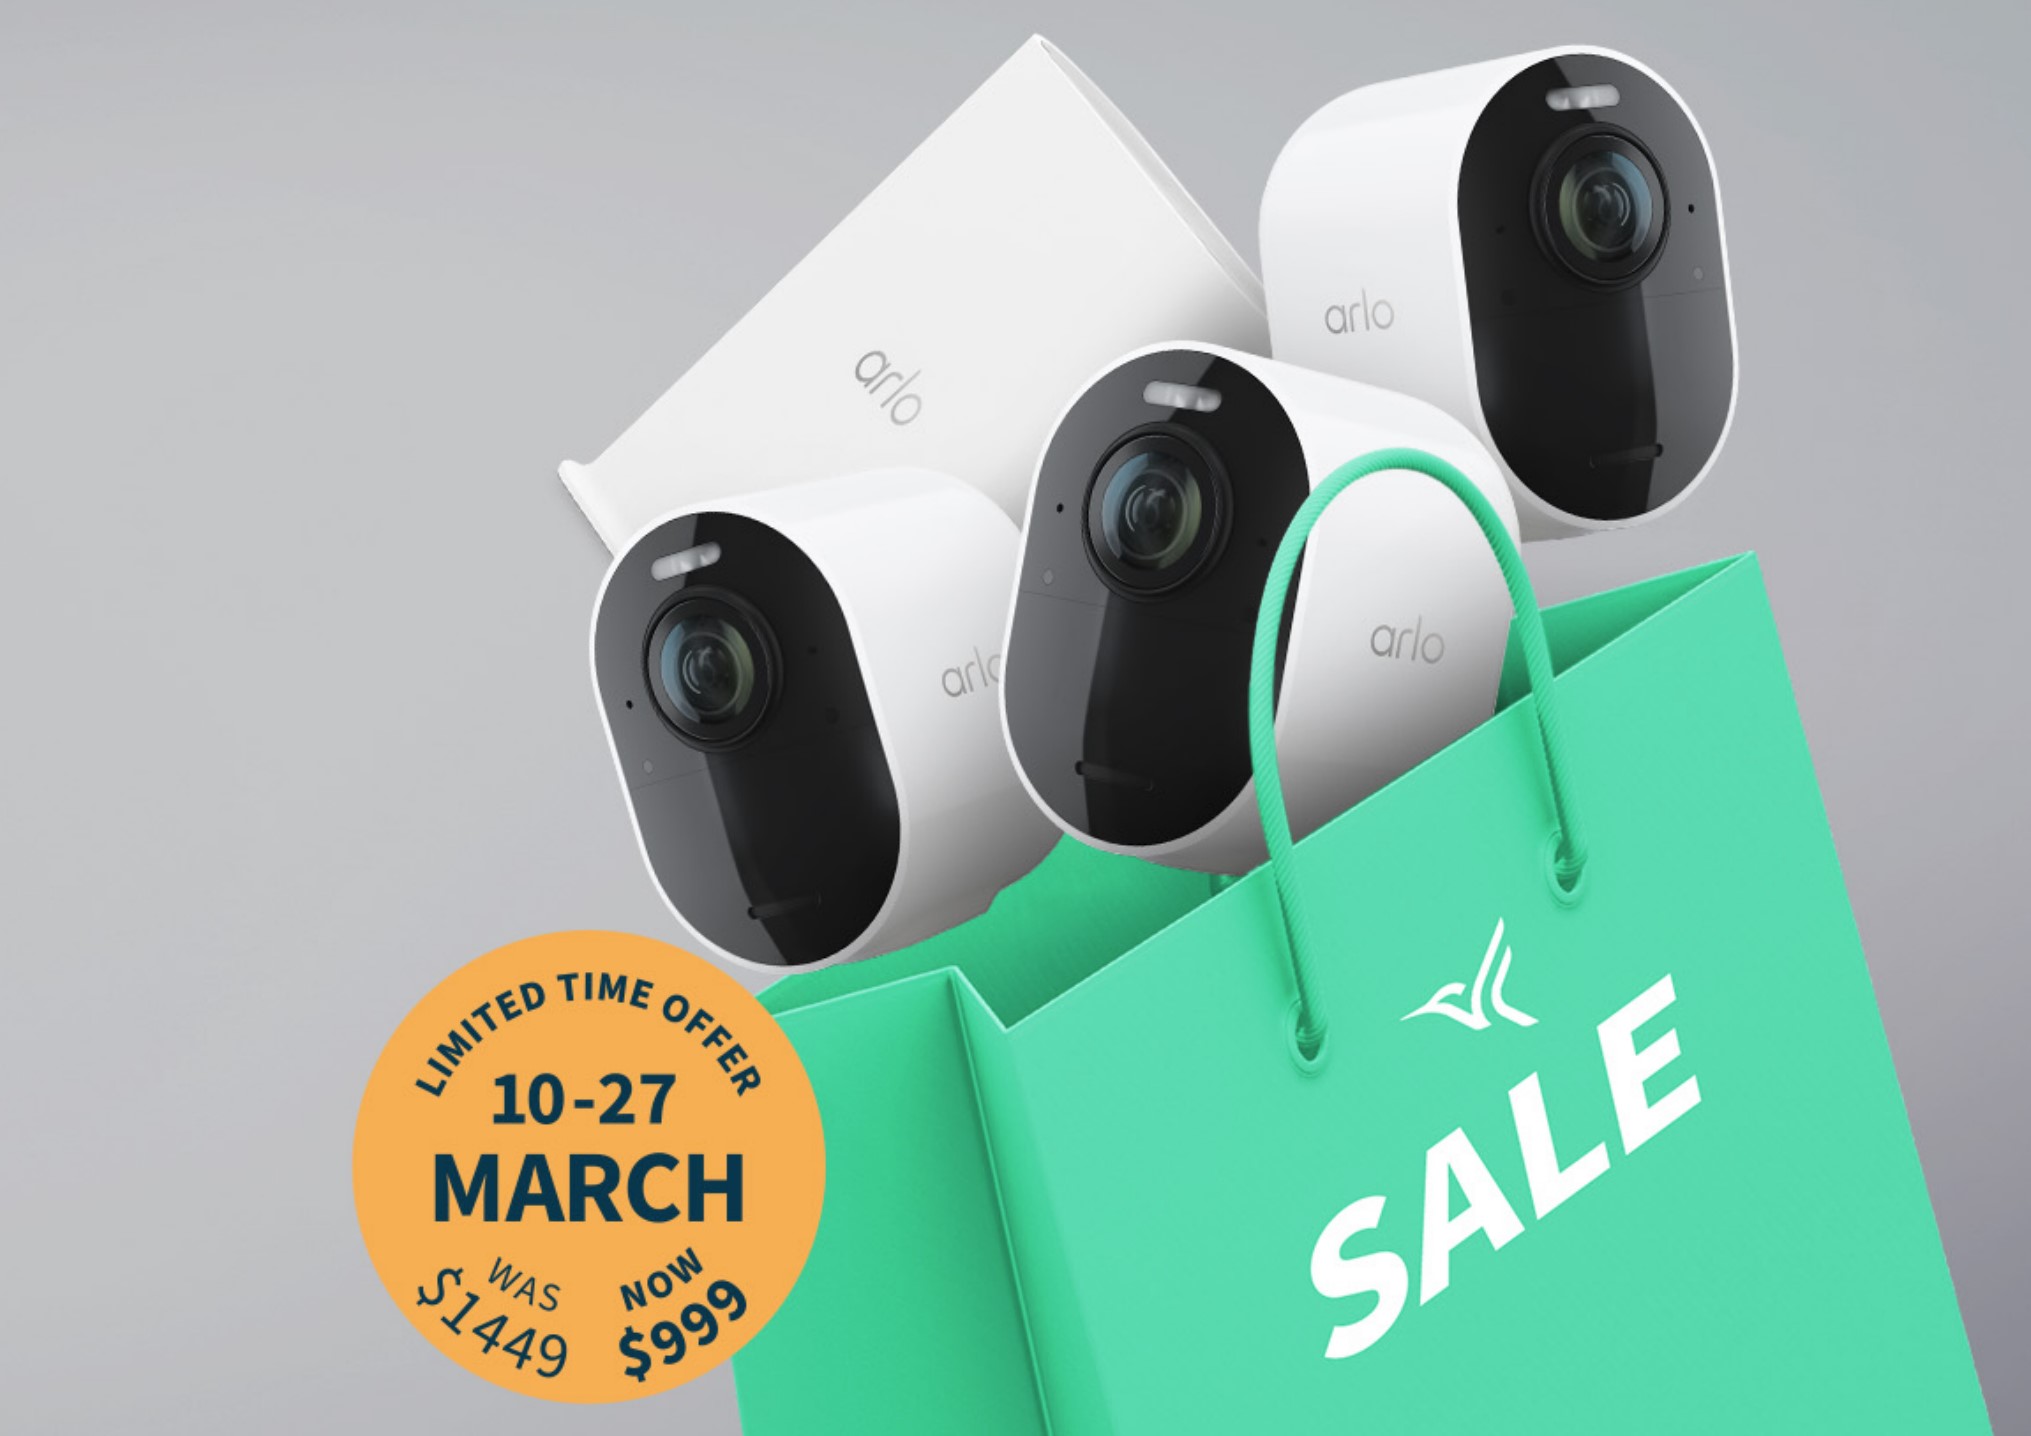 Arlo Ultra 2 4K 3-pack done dirt cheap from 10-27 March